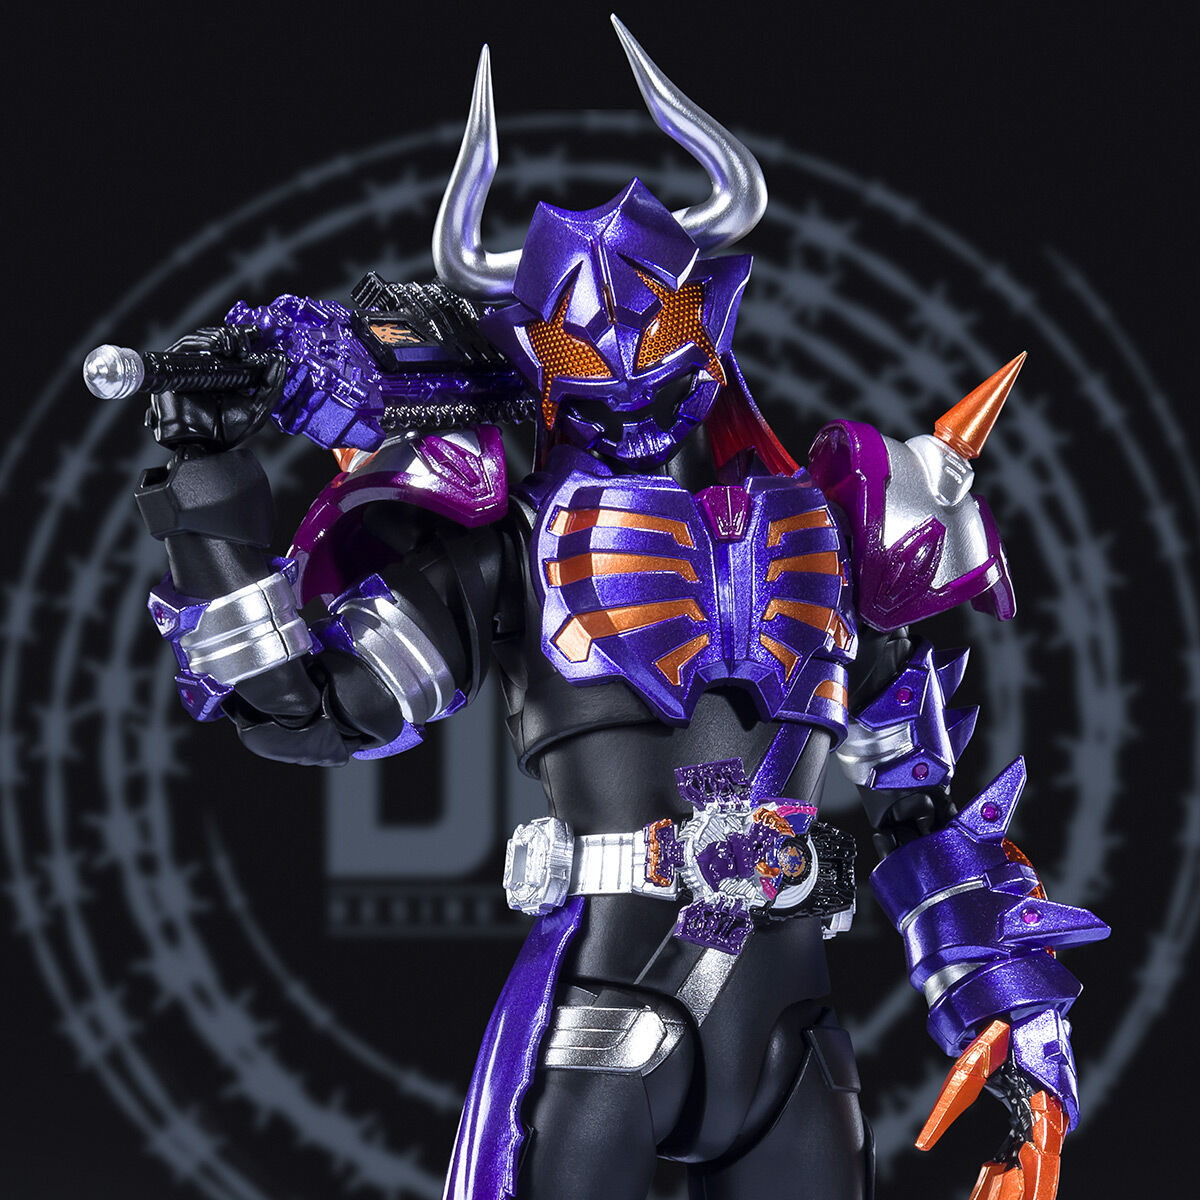 S.H.Figuarts 仮面ライダーバッファ ゾンビフォーム | 仮面ライダー 